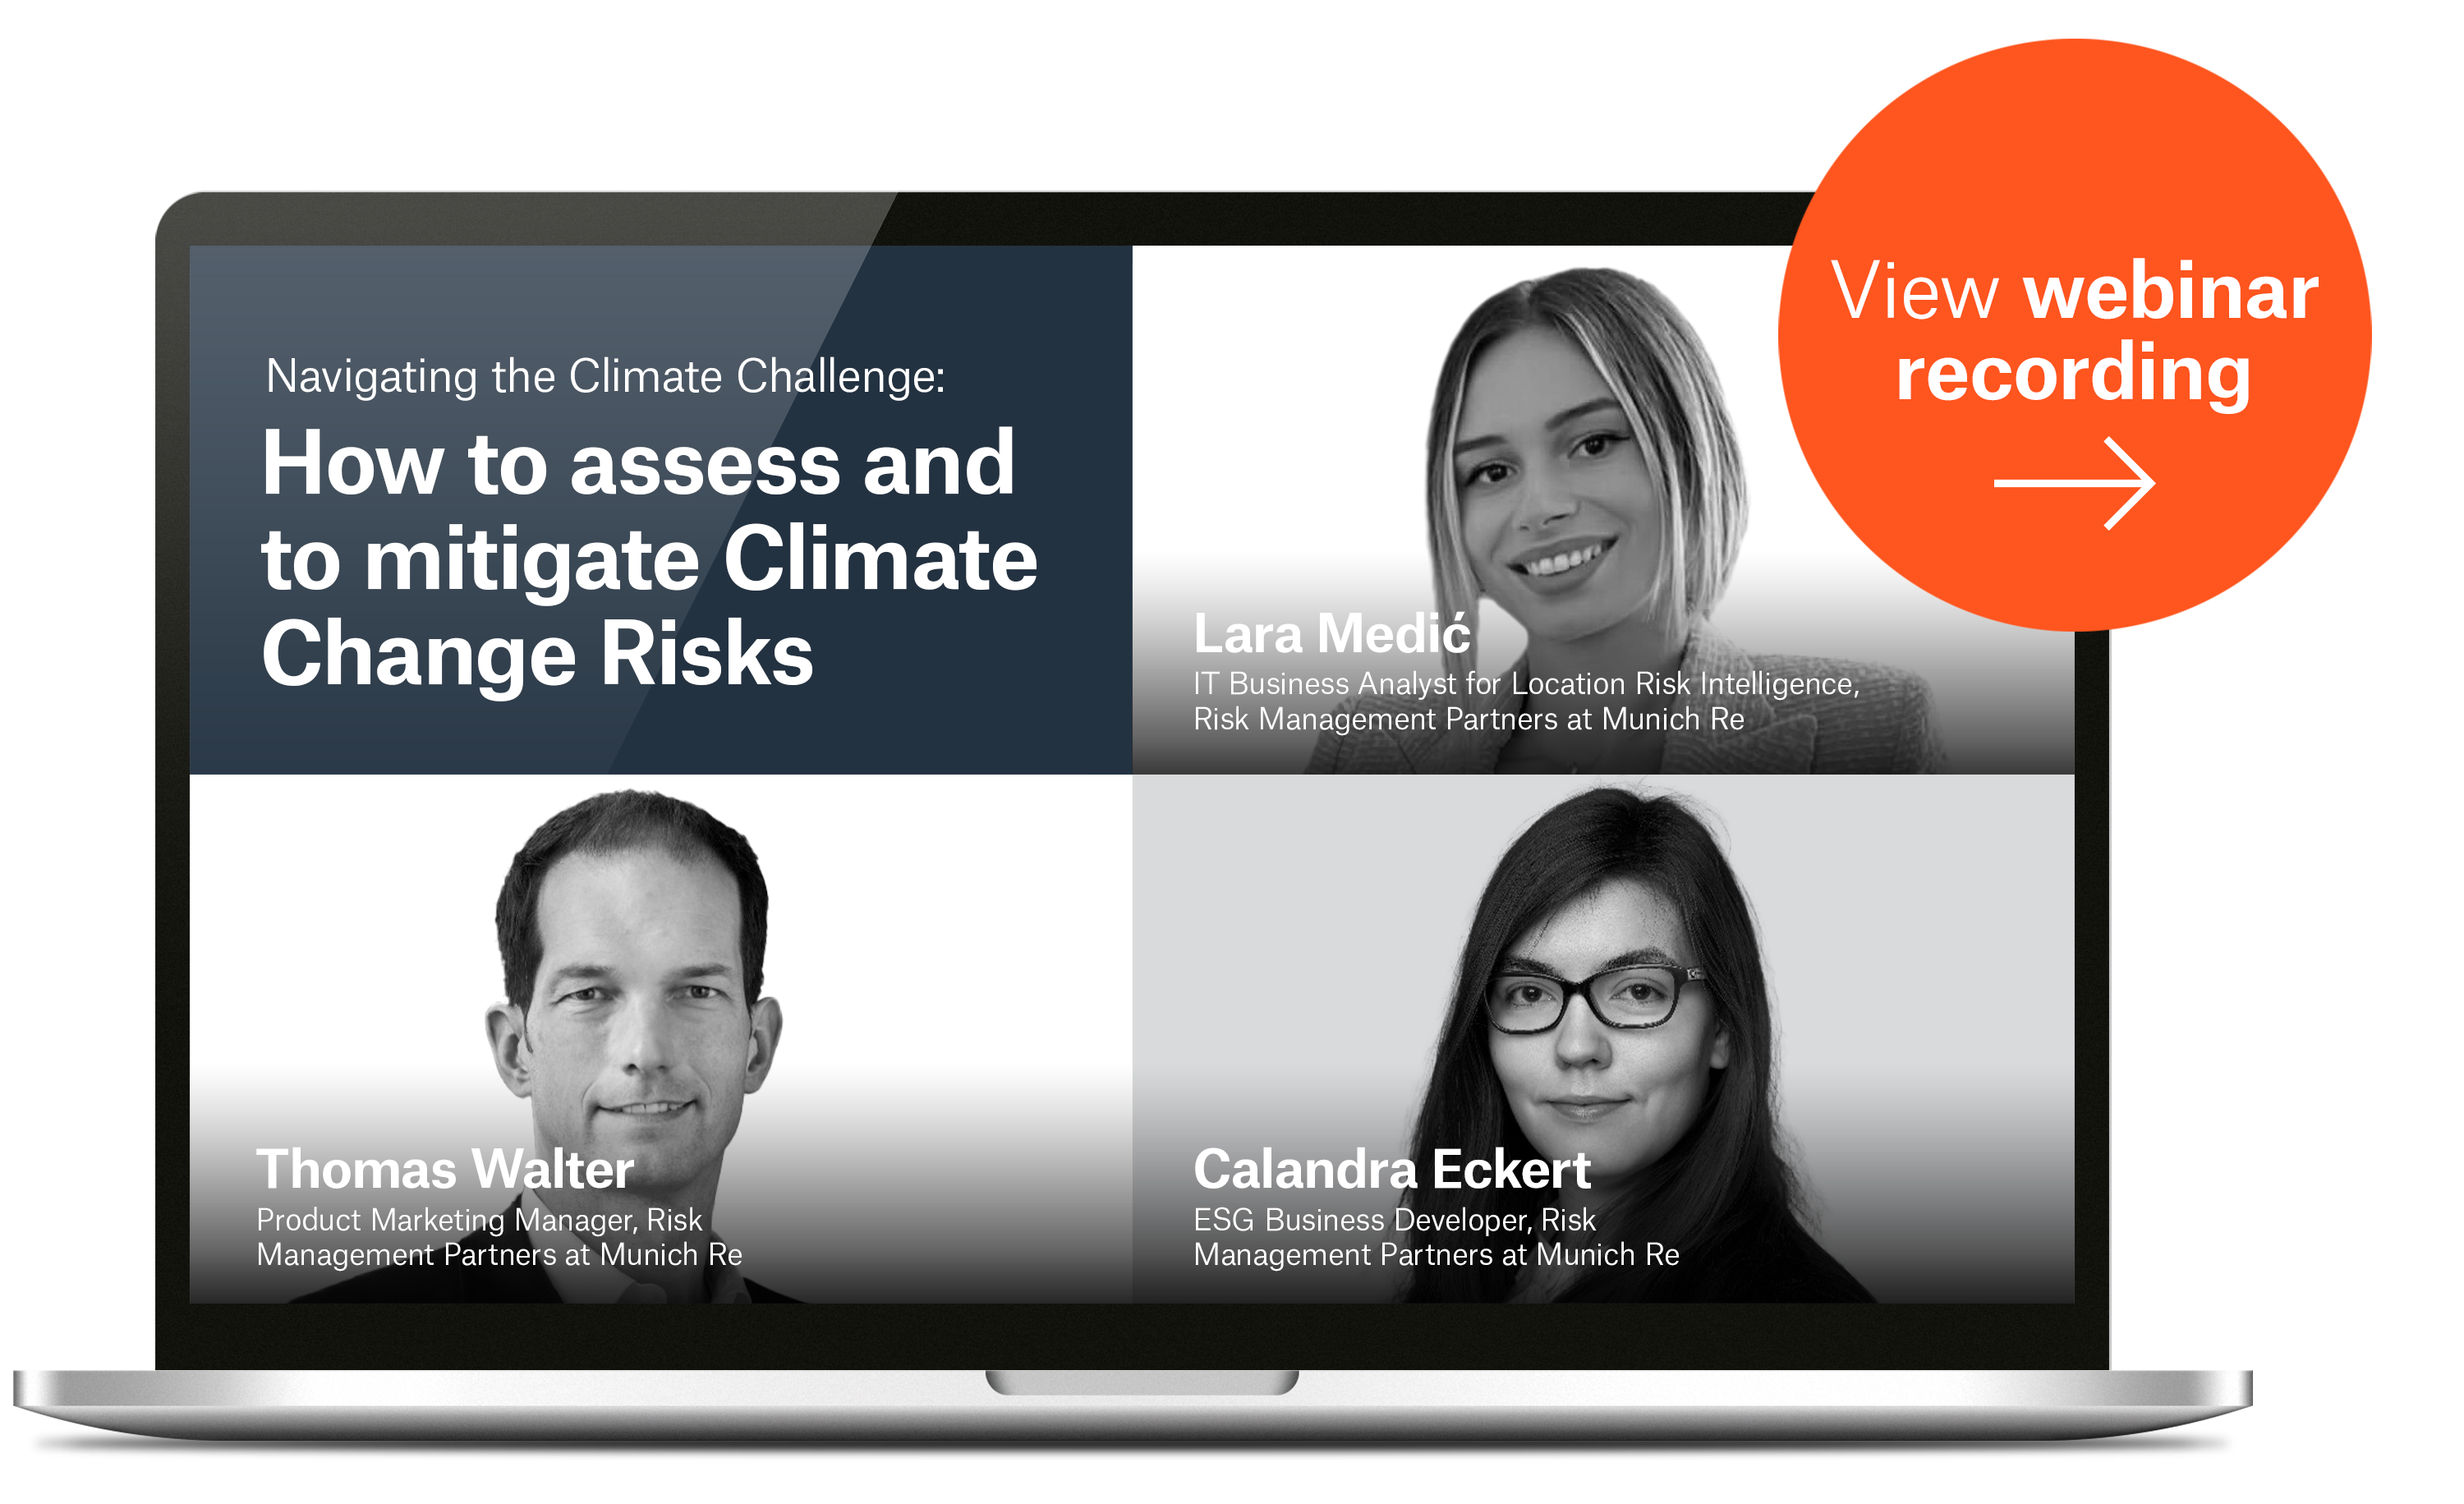 Webinar: Navigating the Climate Challenge: How to assess and to mitigate Climate Change Risks